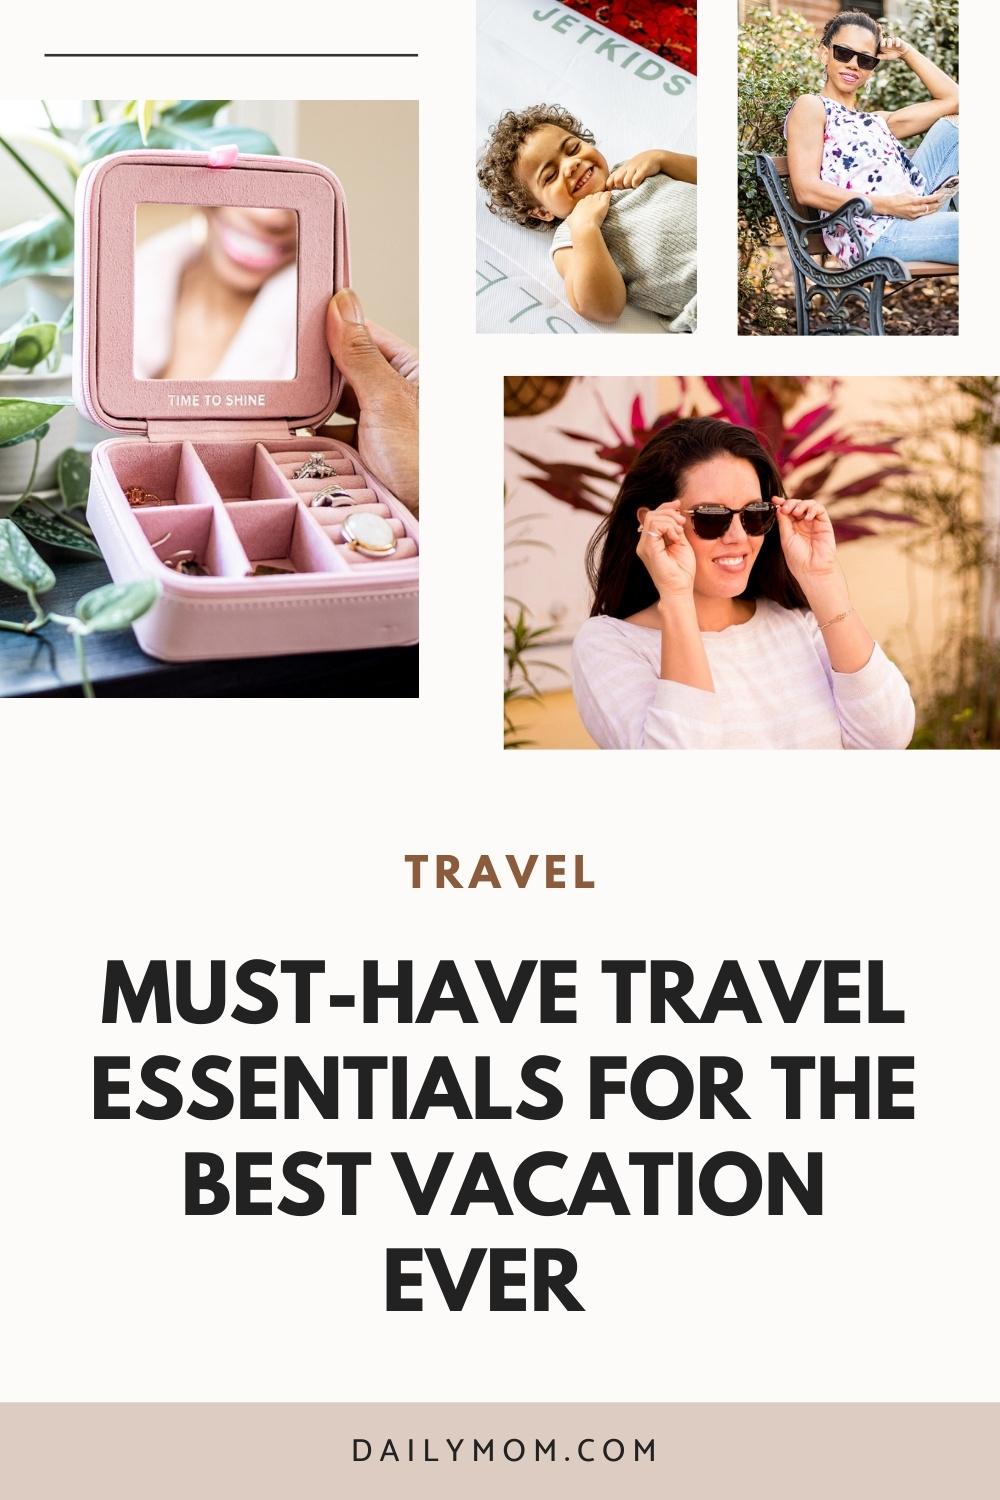 18 Must-Have Travel Essentials For The Best Vacation Ever